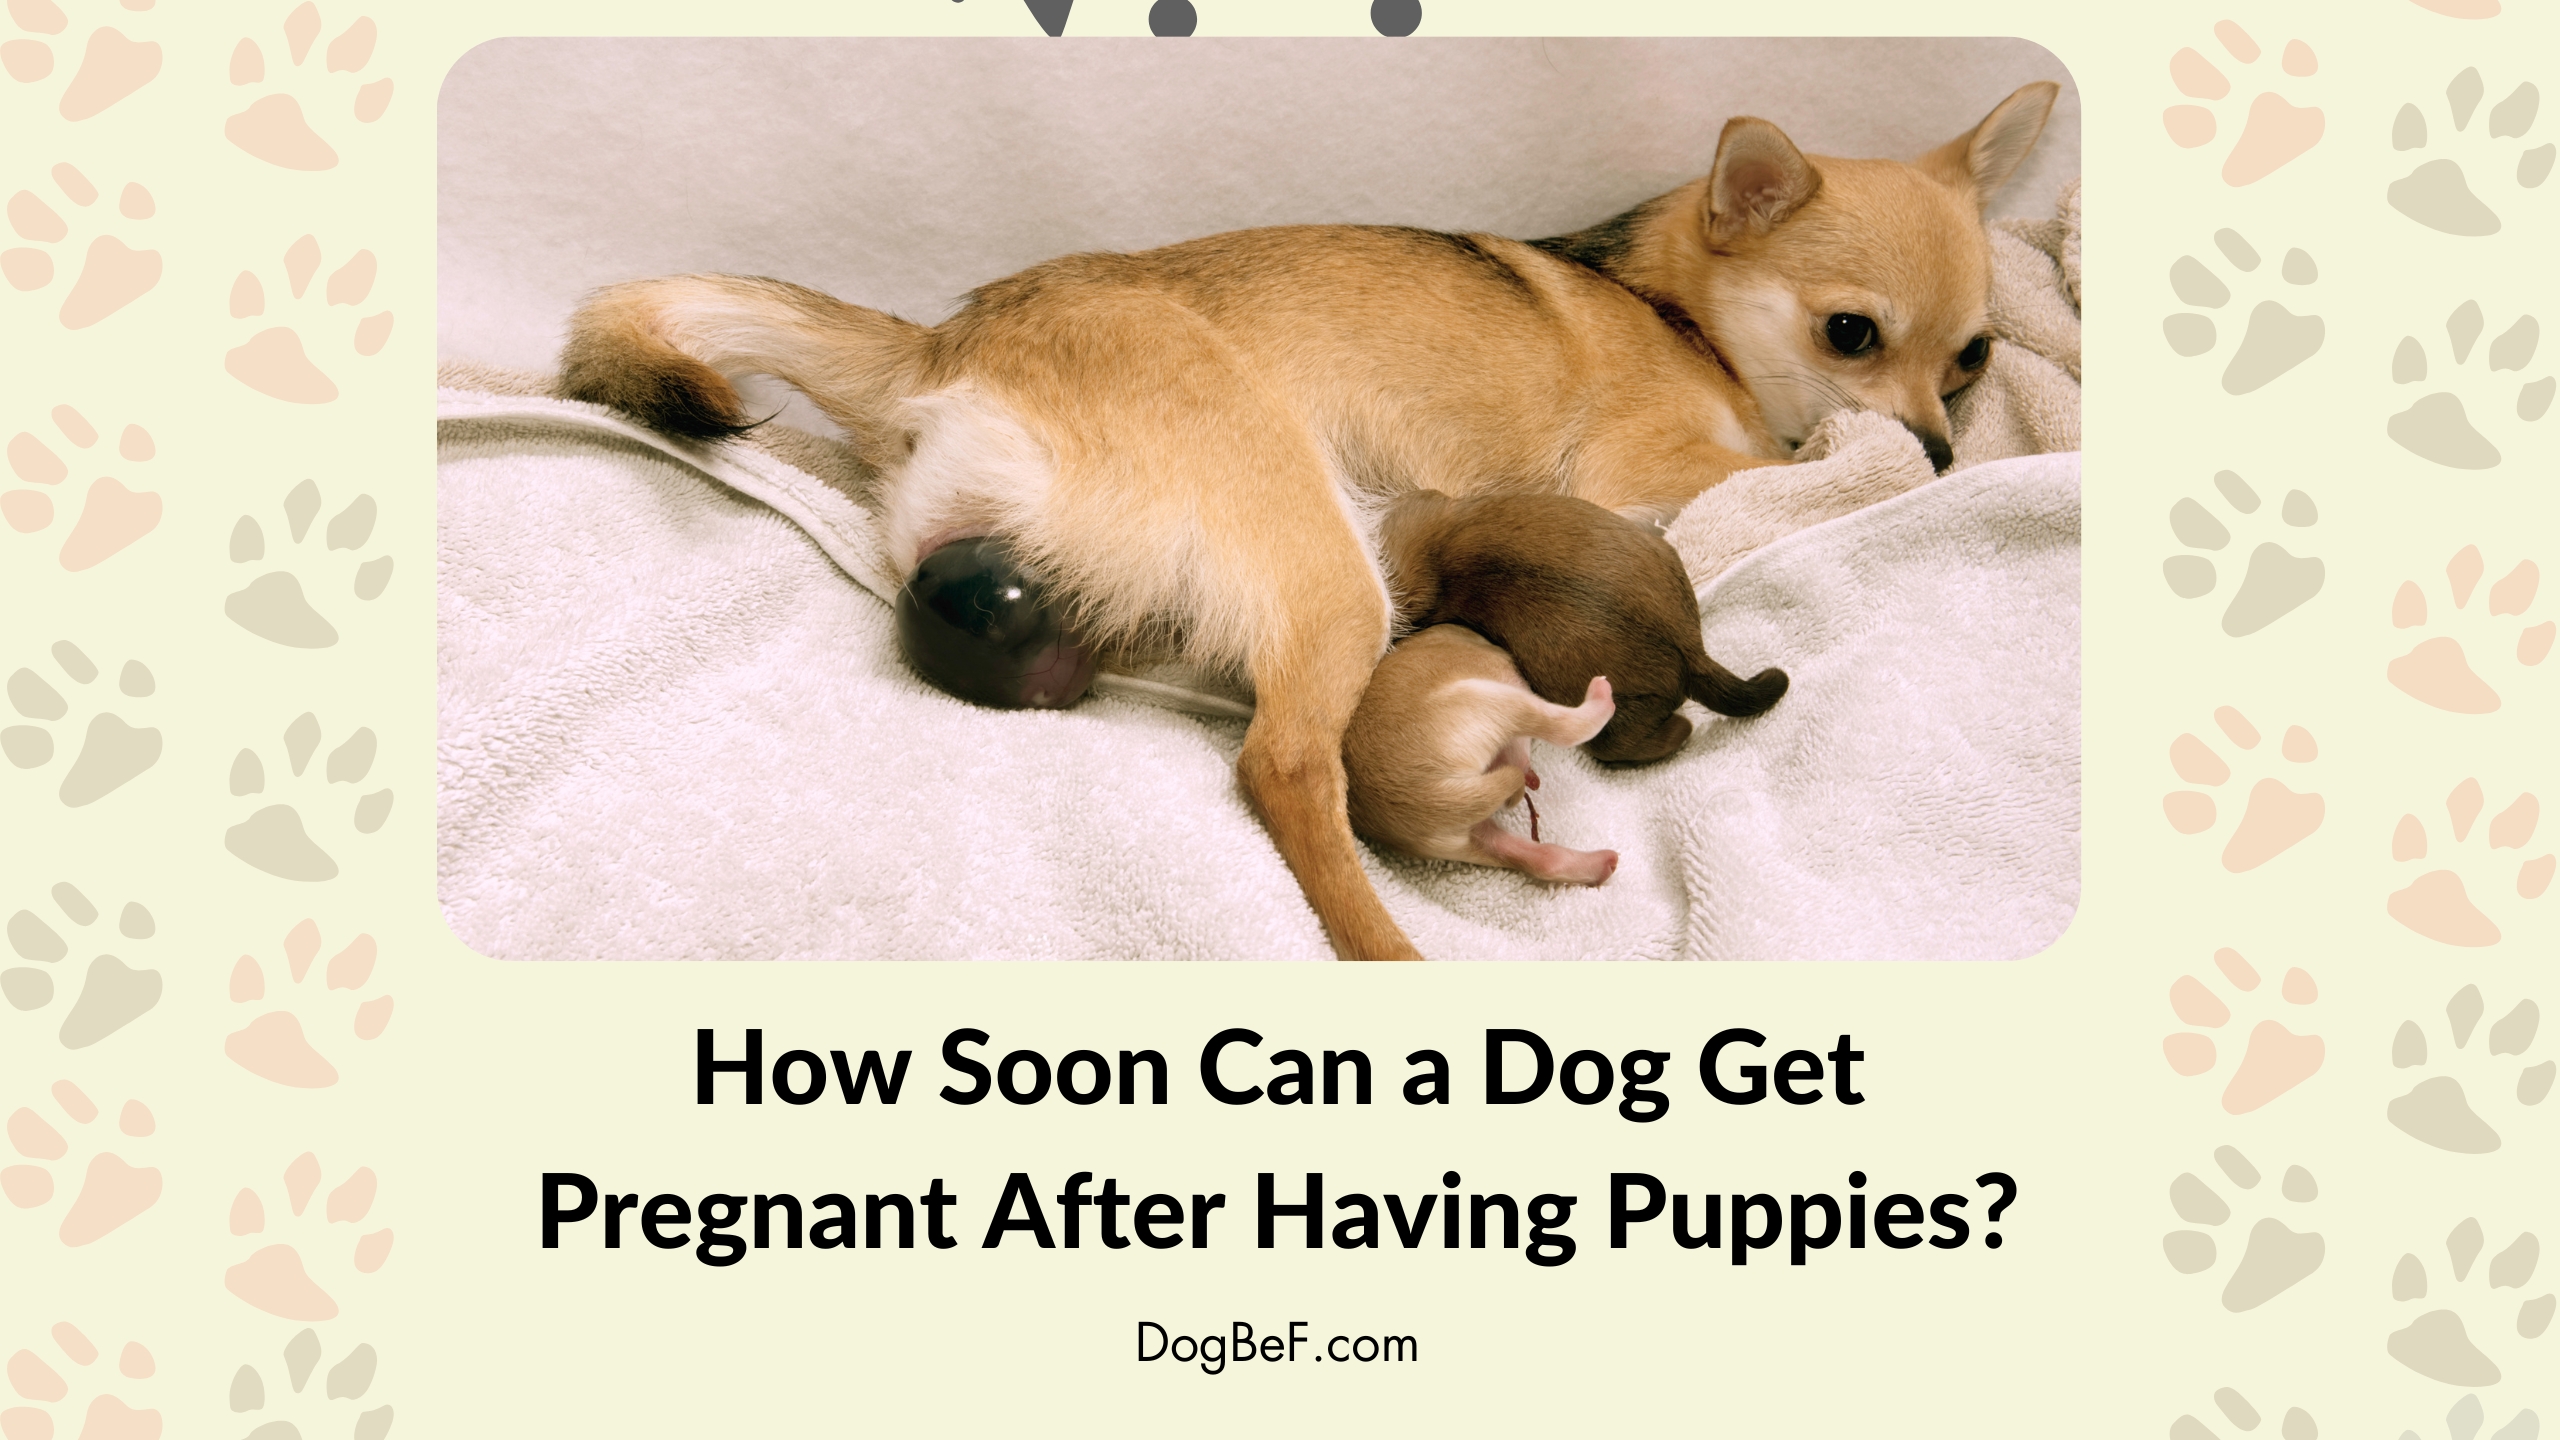 How Soon Can a Dog Get Pregnant After Having Puppies